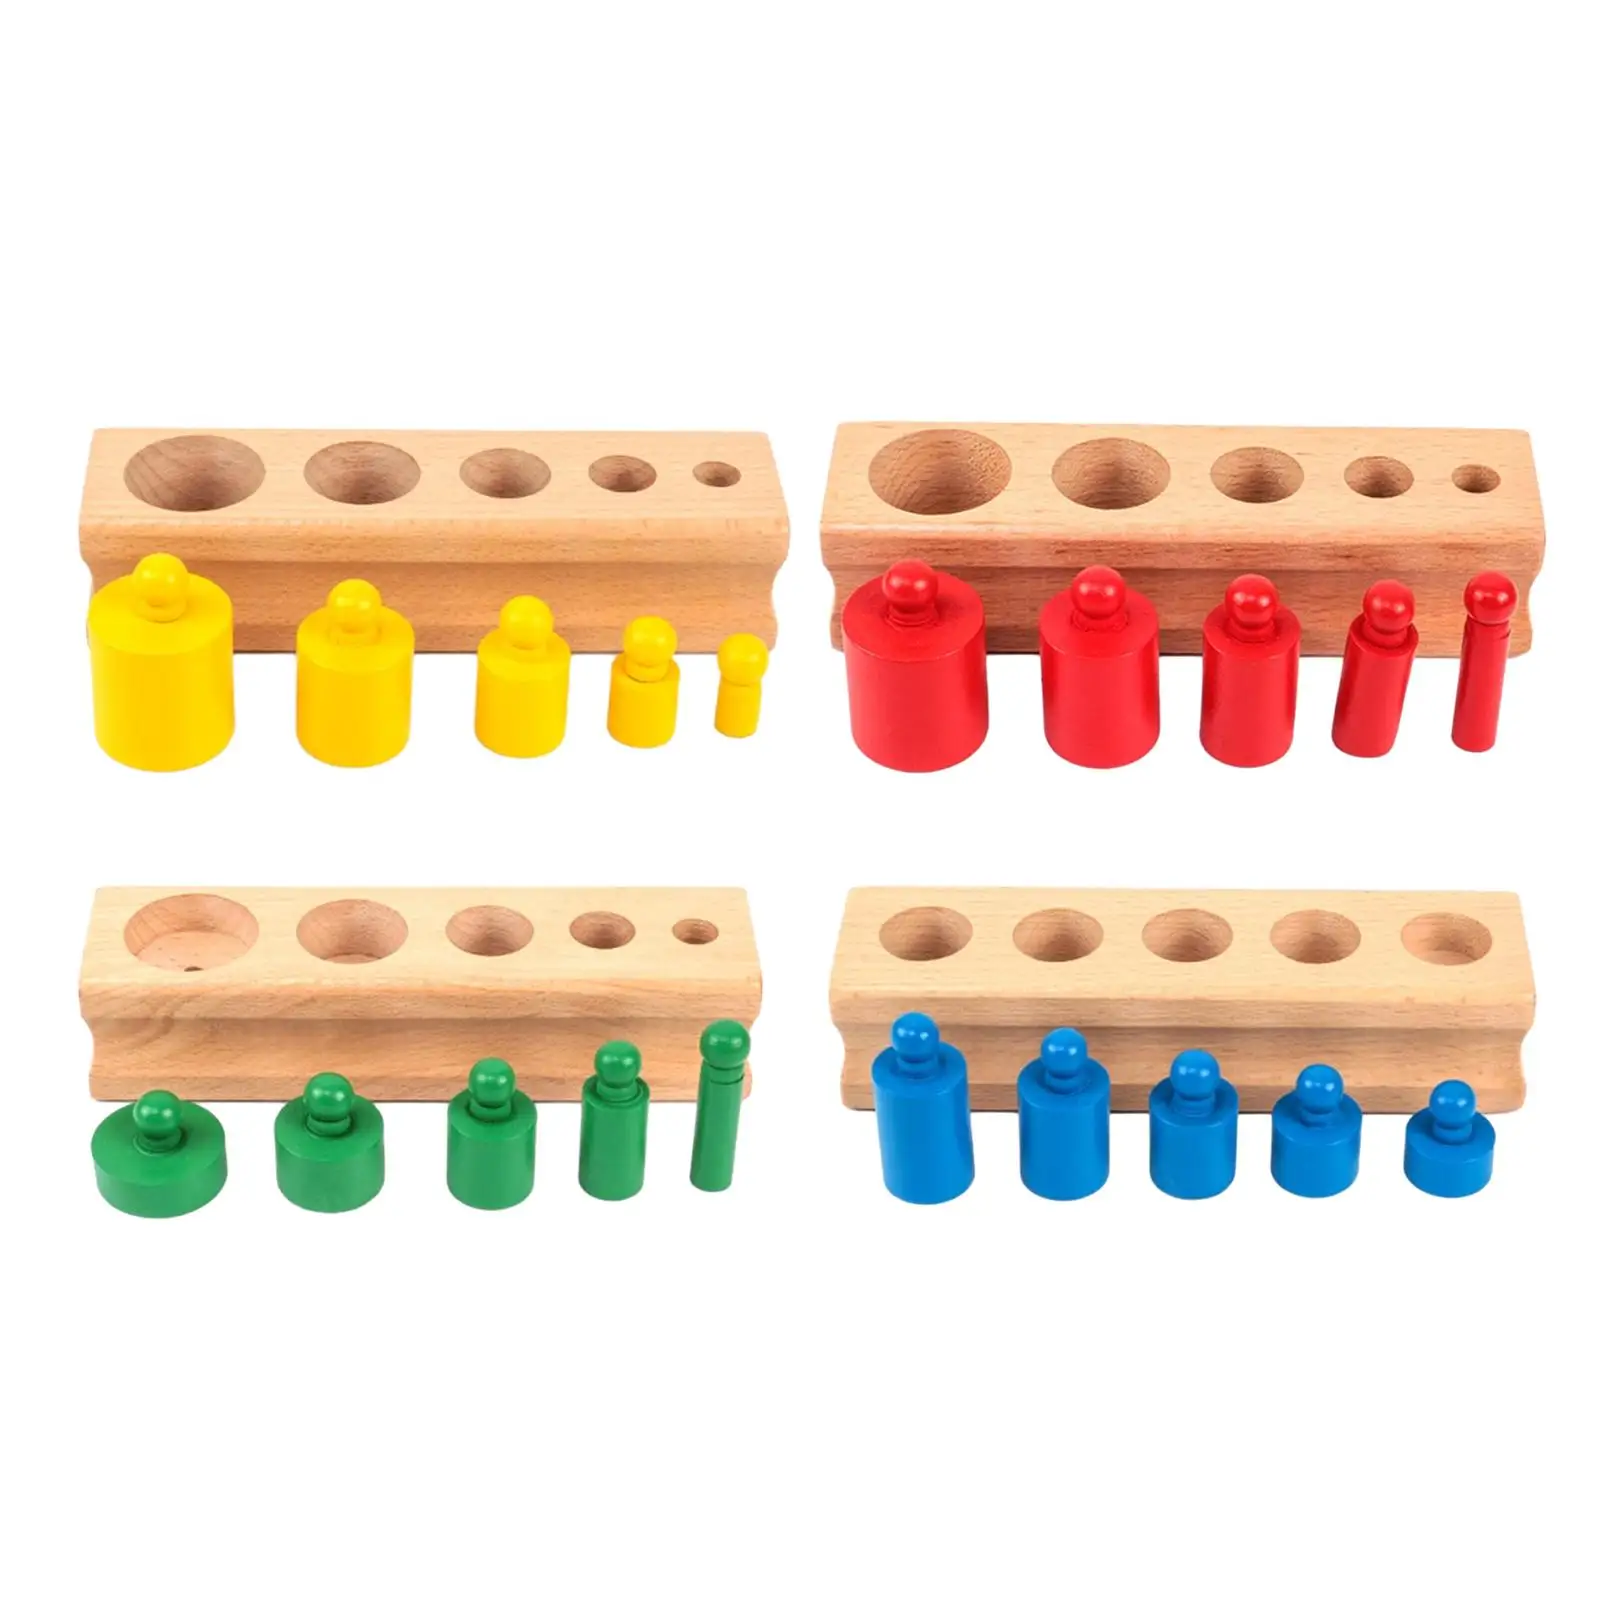 4 Pieces Knobbed Cylinders Blocks Socket Montessori Toy Wooden Cylinders Ladder Blocks for School Home Preschool Toys Toddlers